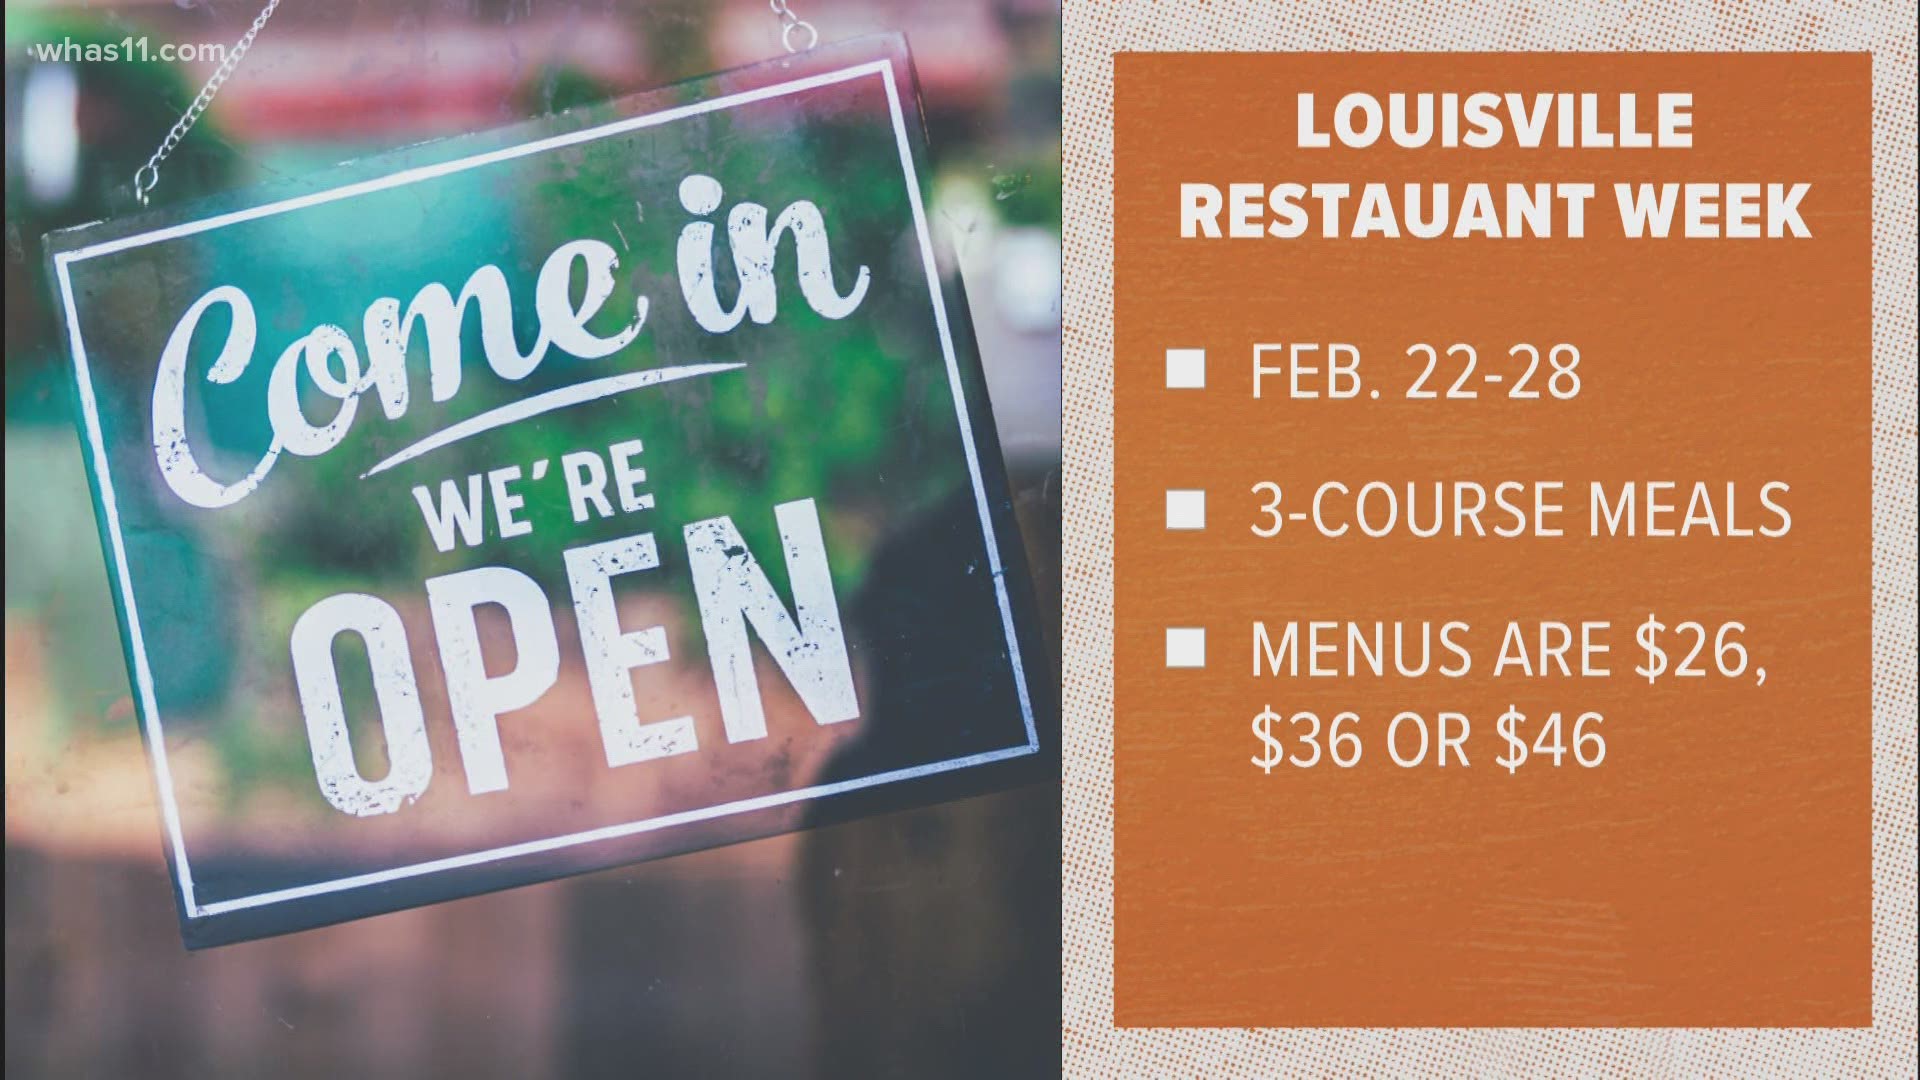 The event offers a week crafted to promote positive publicity and encourage locals to visit an array of Louisville’s culinary talents.